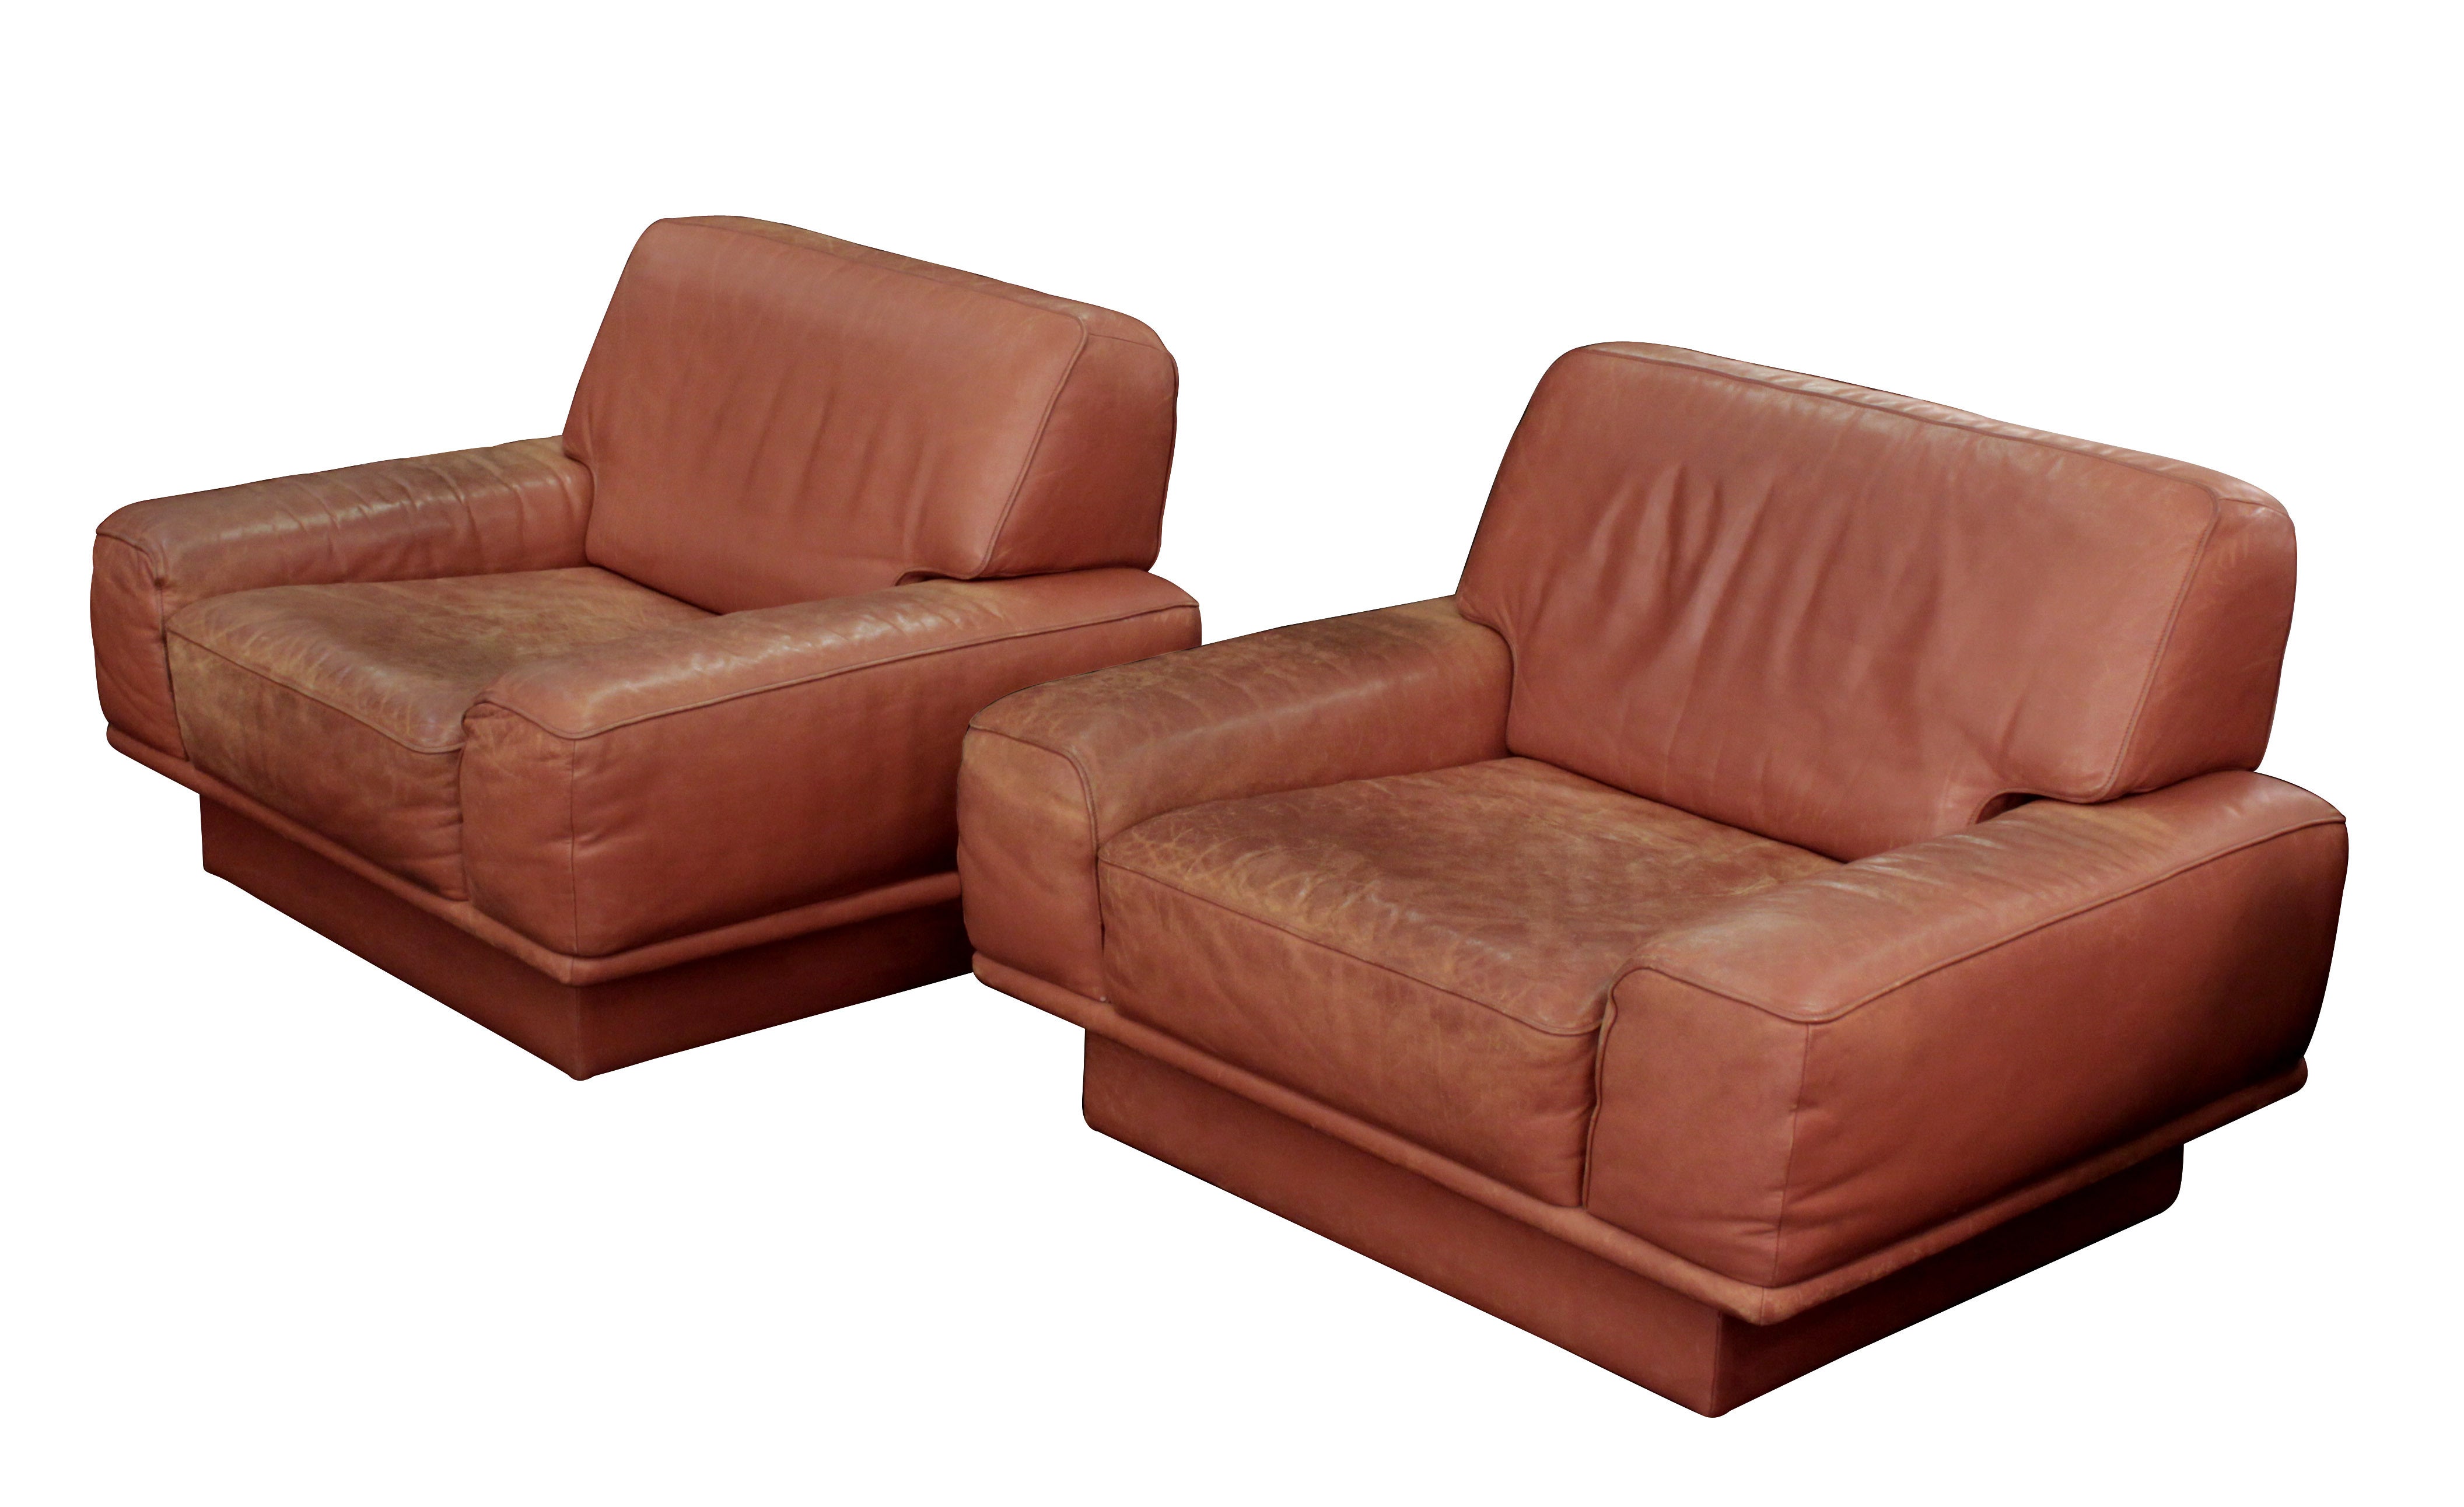 Pair of Large Leather Club Chairs Attributed to De Sede